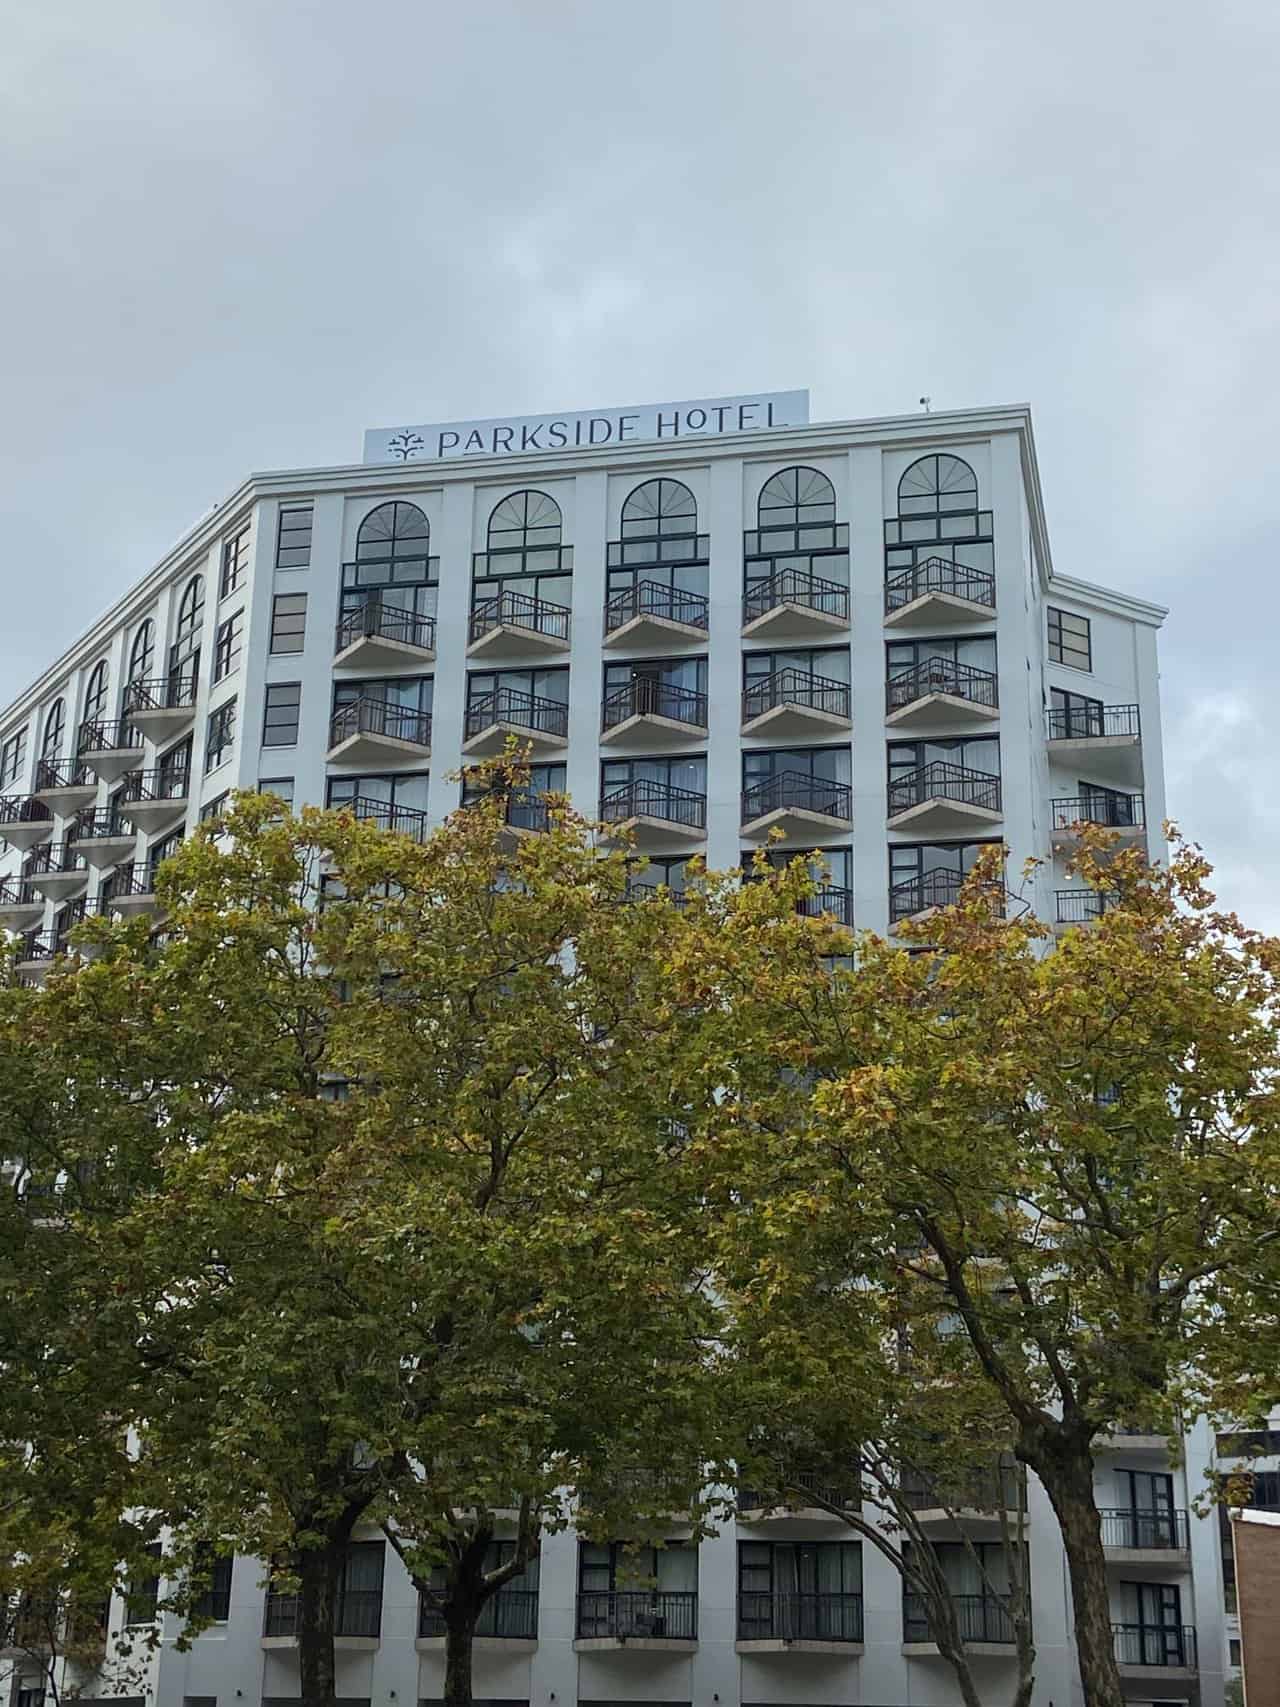 Parkside Hotel, where to stay in Auckland